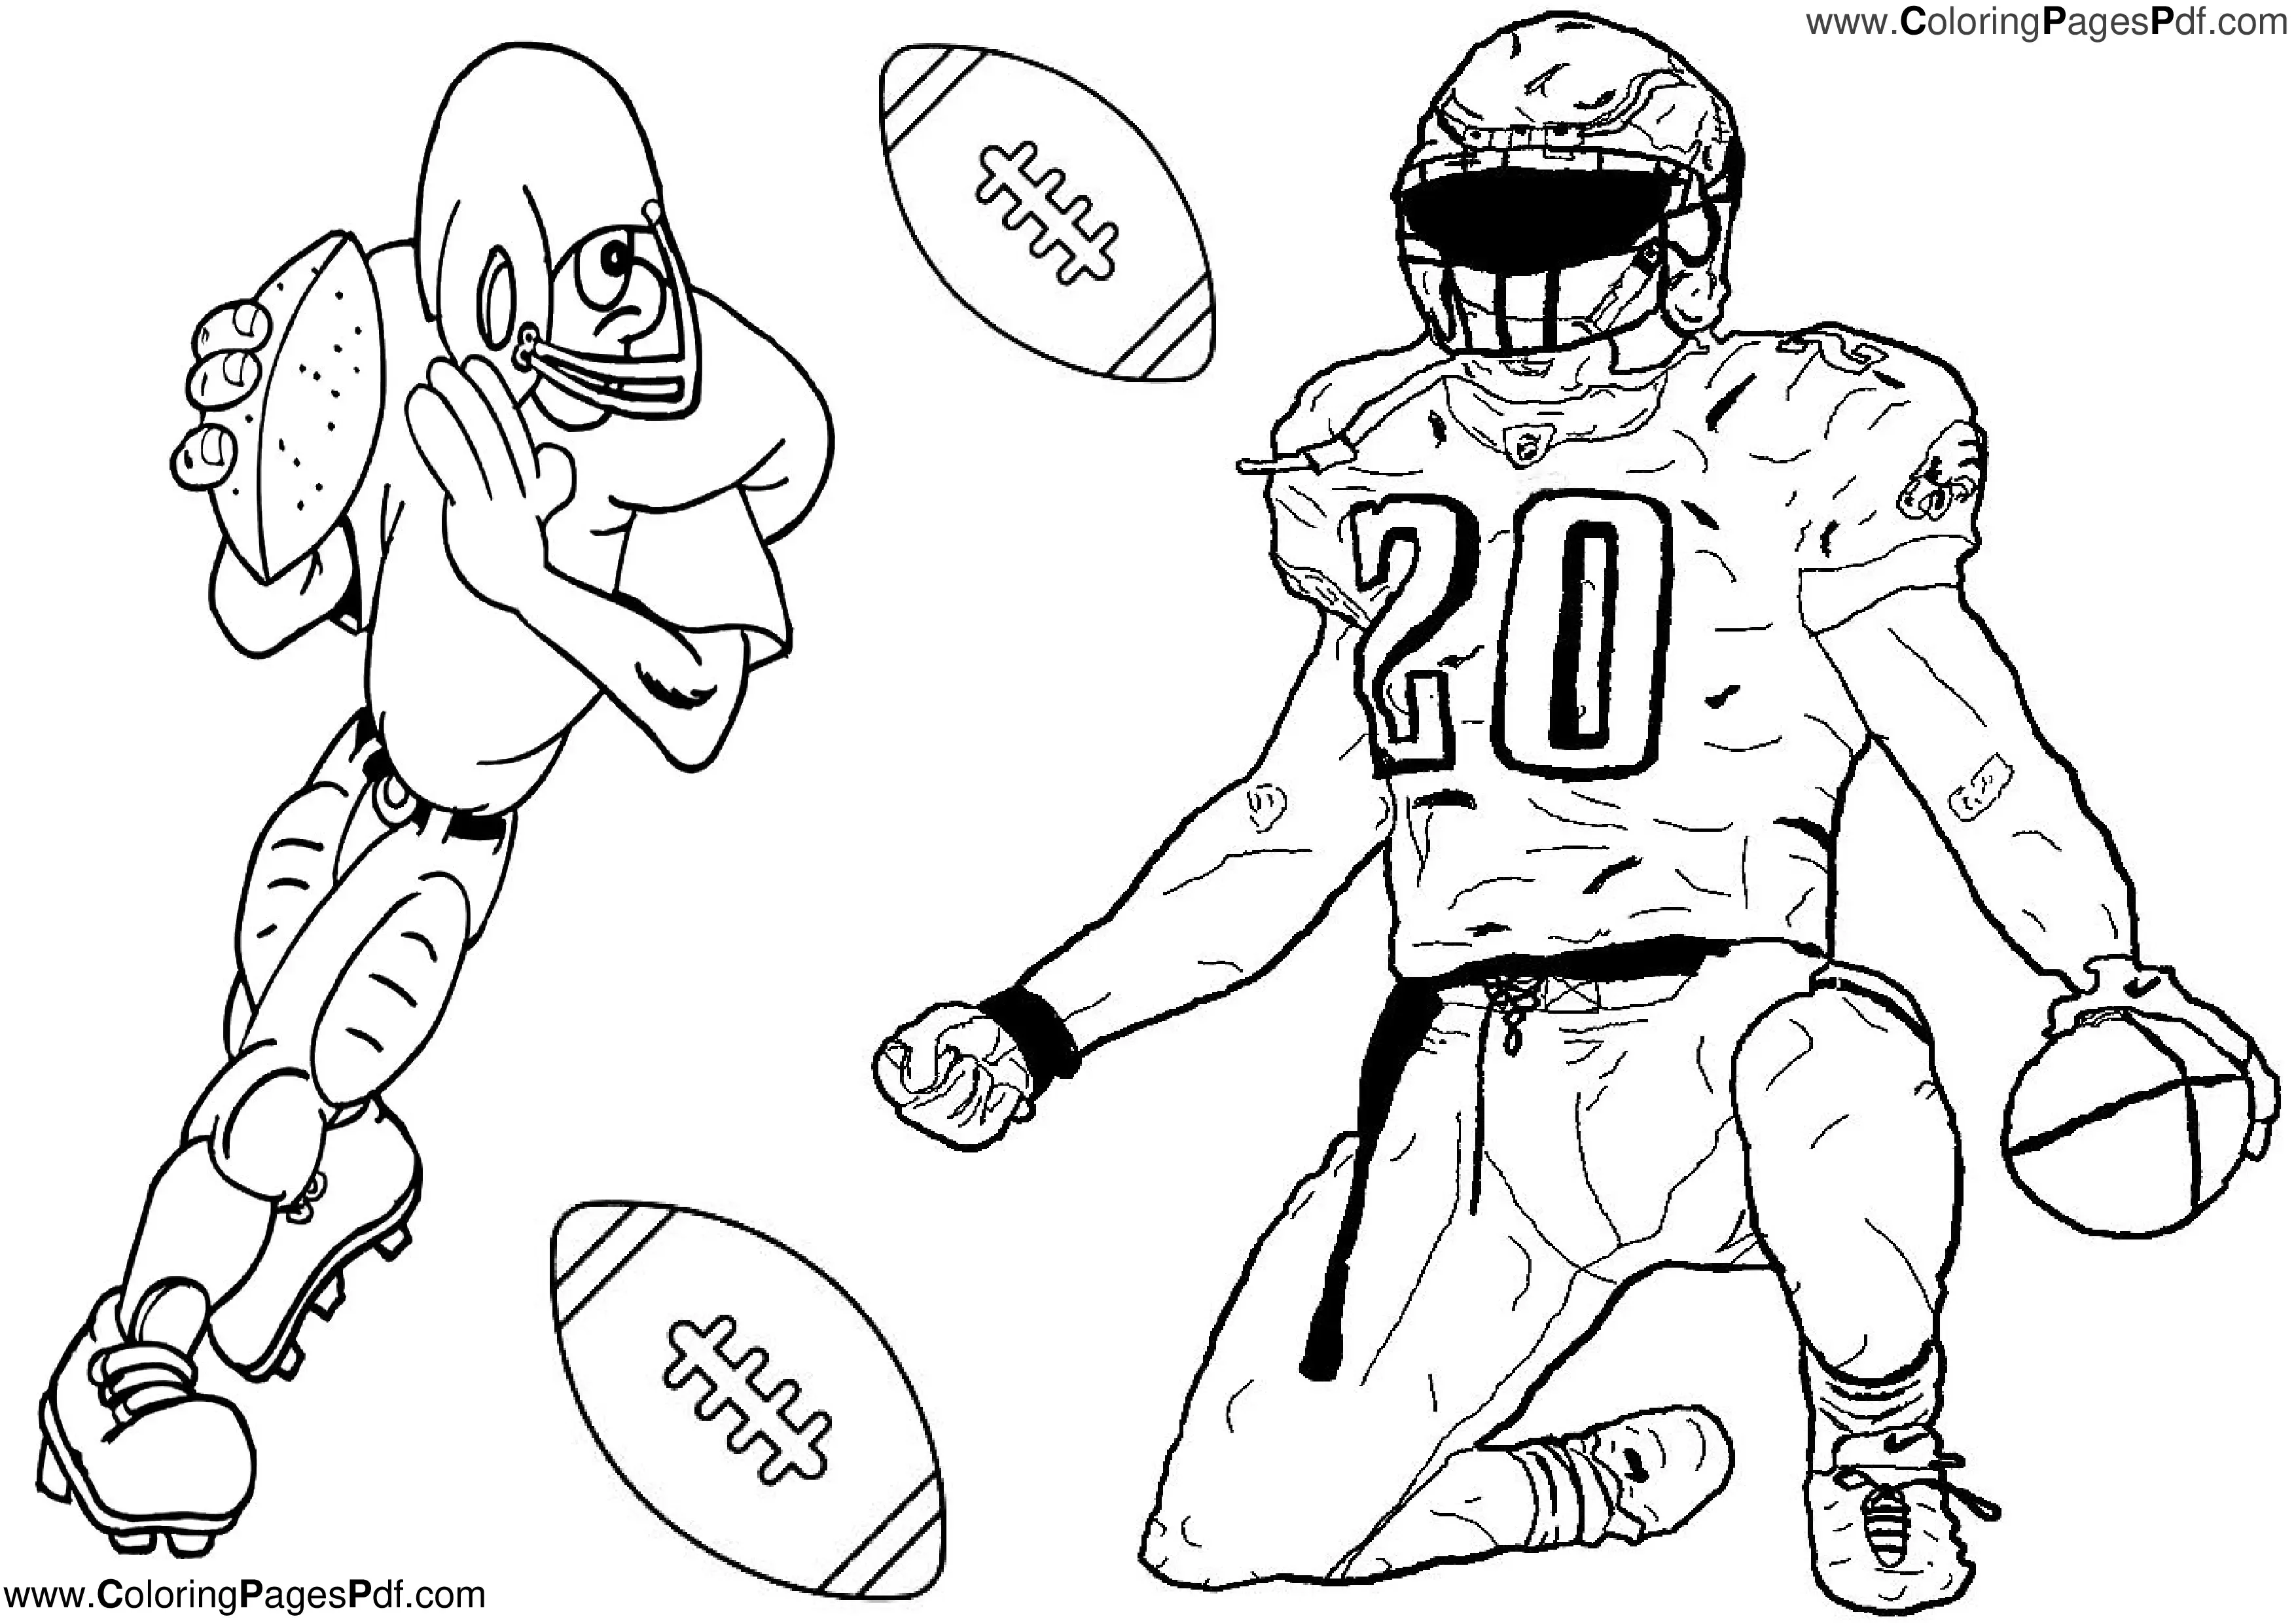 Free printable Football Pictures